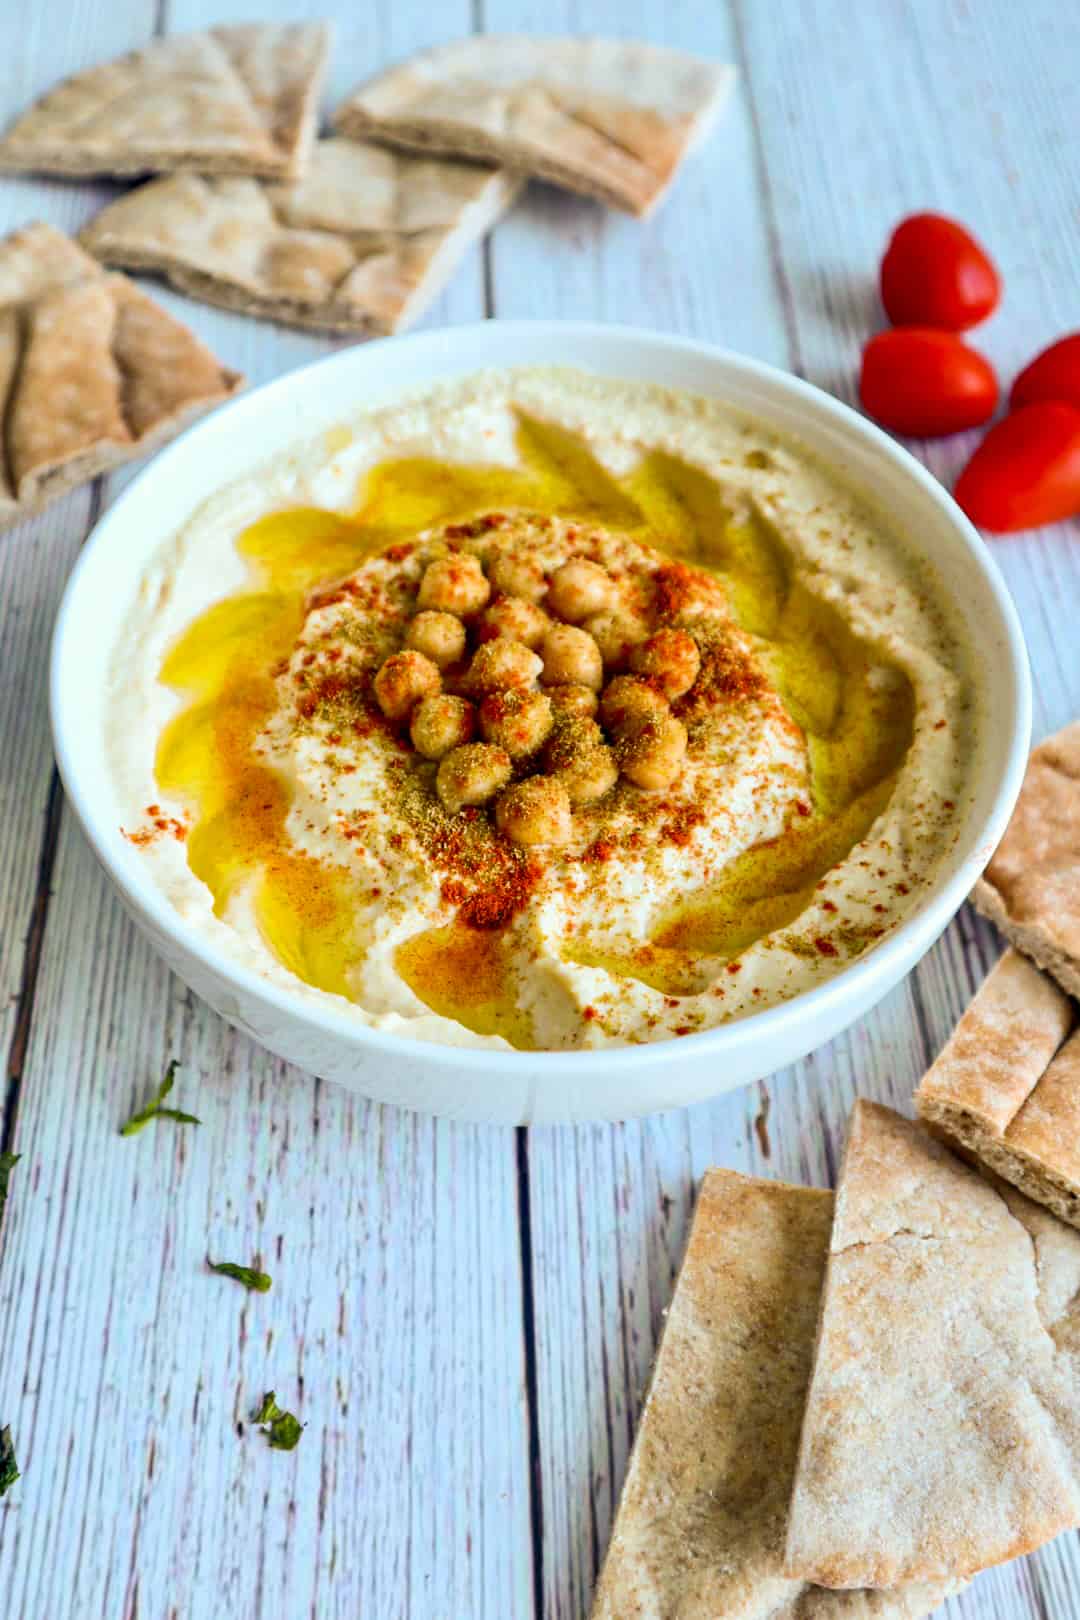 A bowl of hummus with chick peas, paprika, cumin and olive oil on top. side of sliced pita bread.